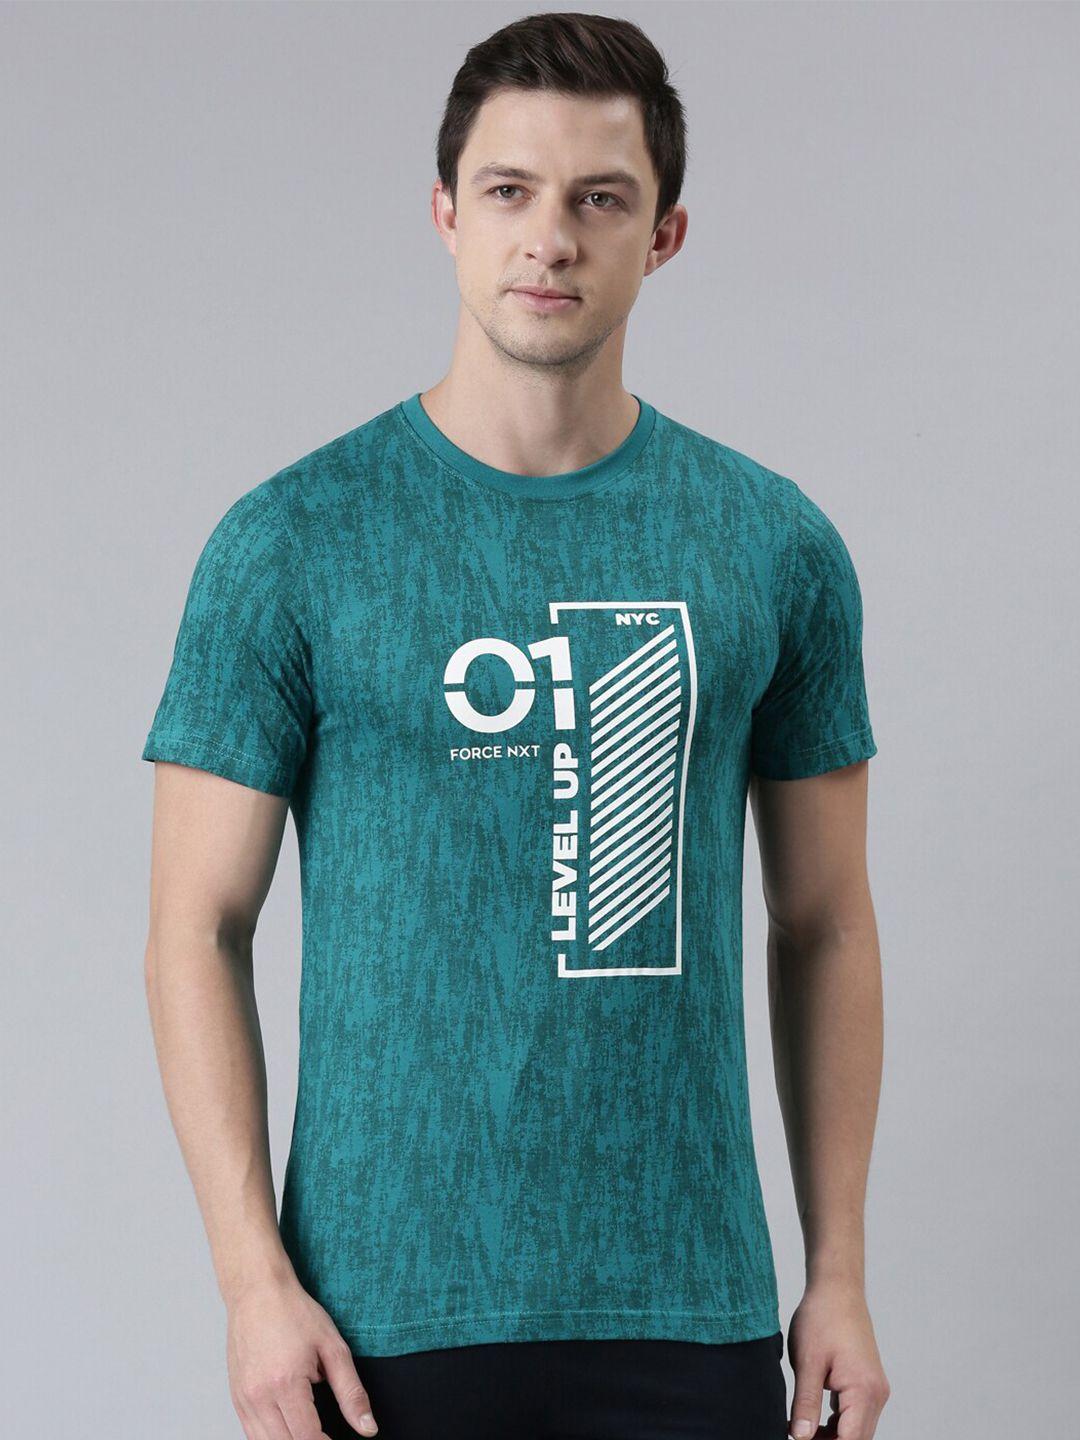 force nxt men teal printed round neck cotton t-shirt